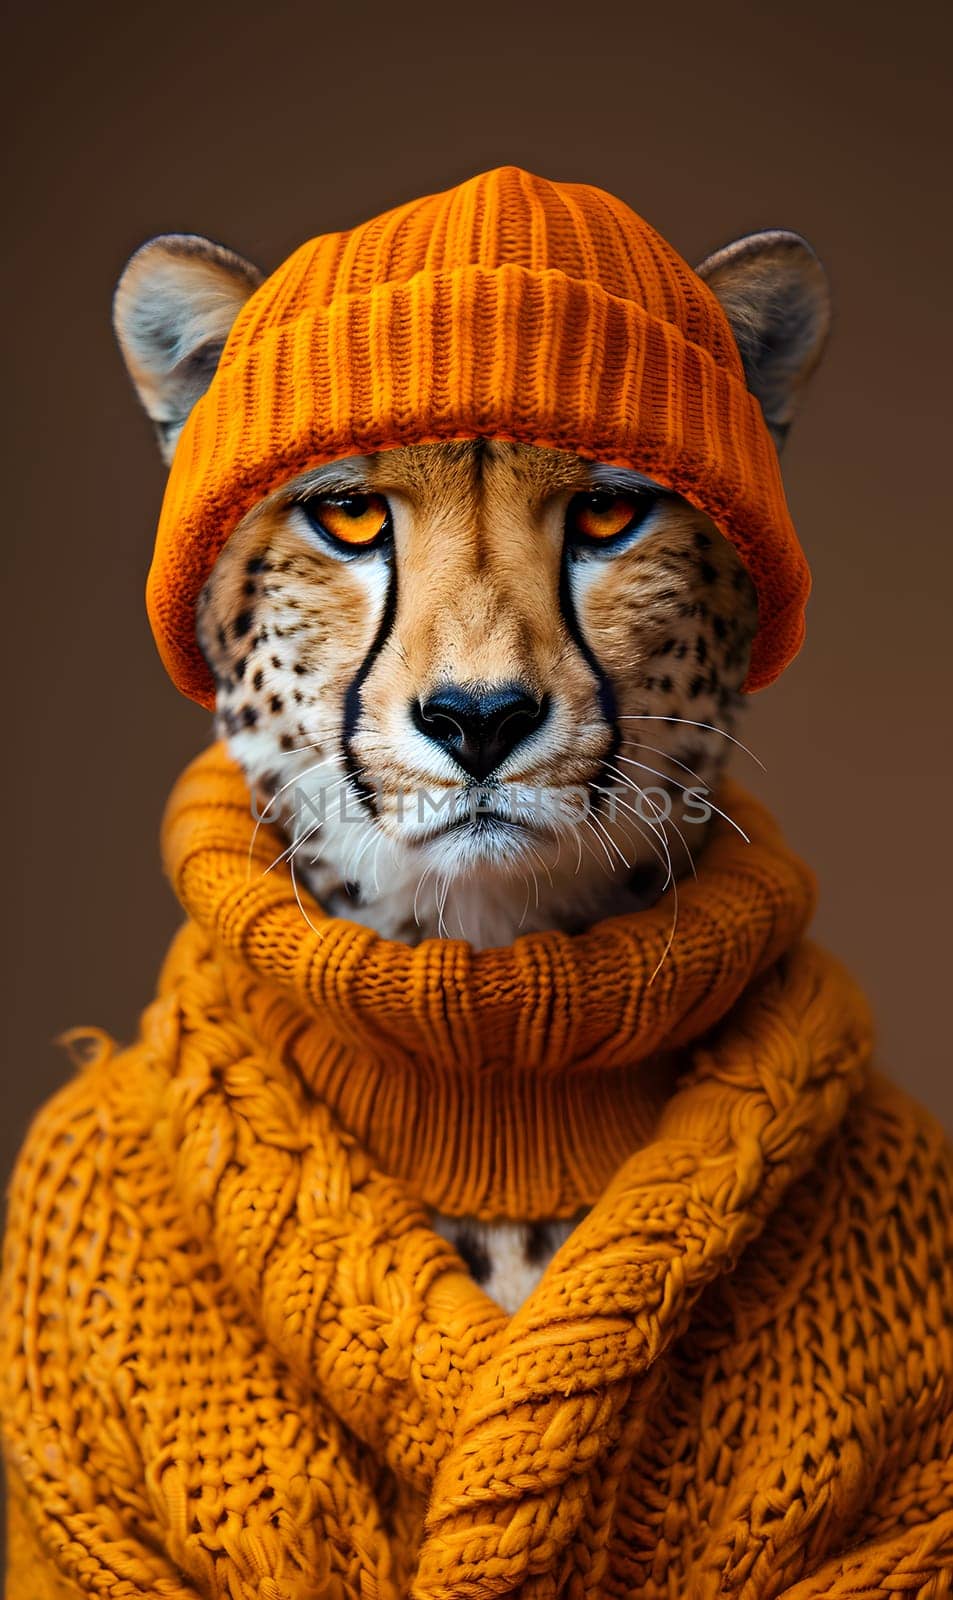 A Felidae sporting an orange hat and scarf, resembling a Bengal tiger or Siberian tiger. This carnivore belongs to the big cats family and is a terrestrial animal with a snout